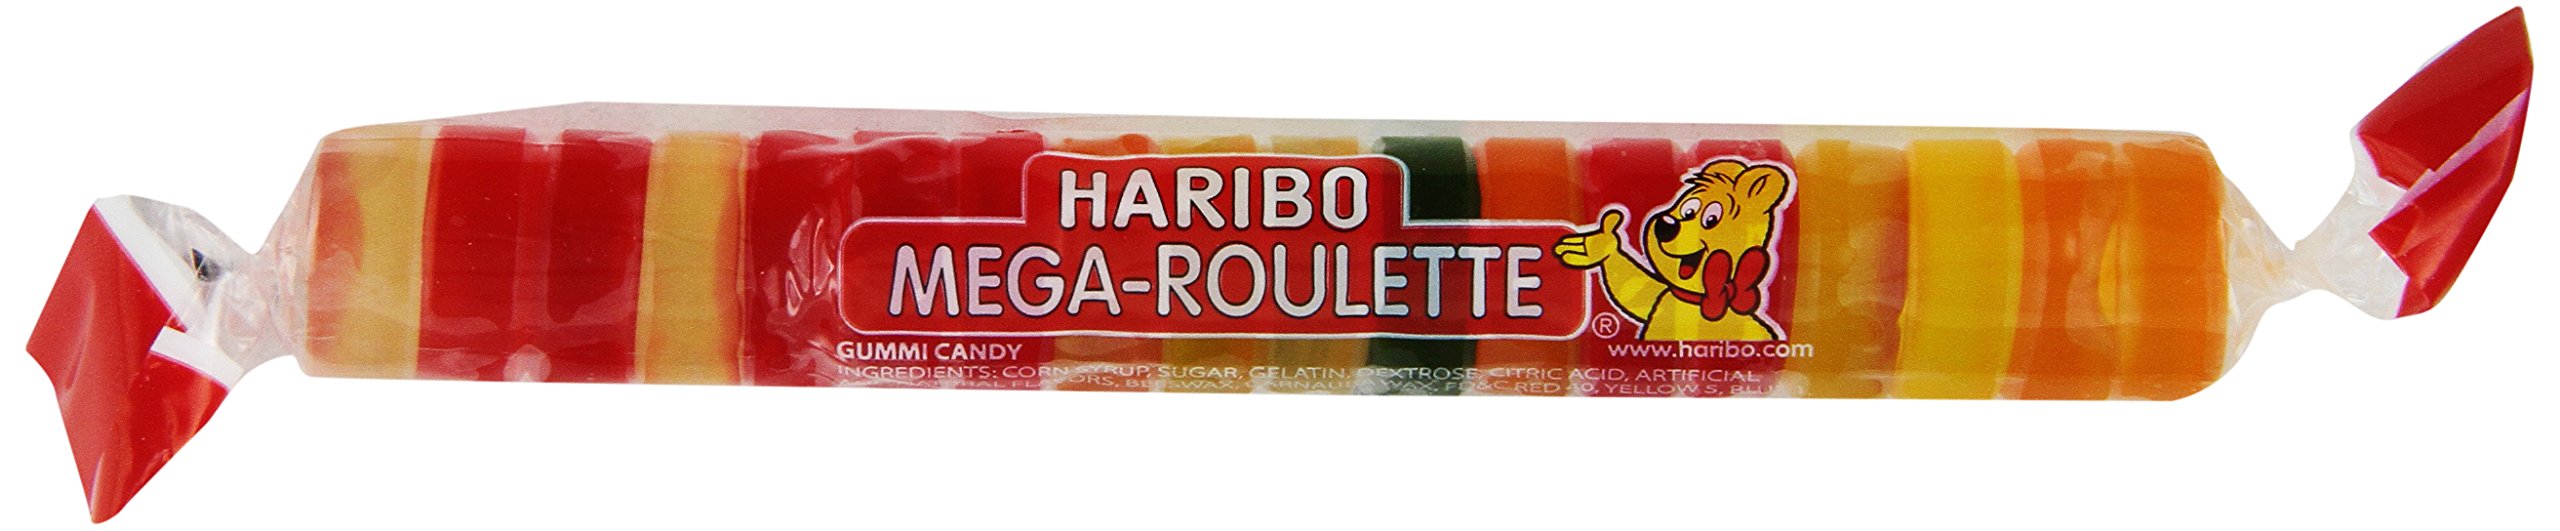 24-Pack 1.59-Oz Haribo Mega-Roulette Gummi Candy $11.19 ($0.47 each) or less + Free Shipping w/ Prime or on $35+